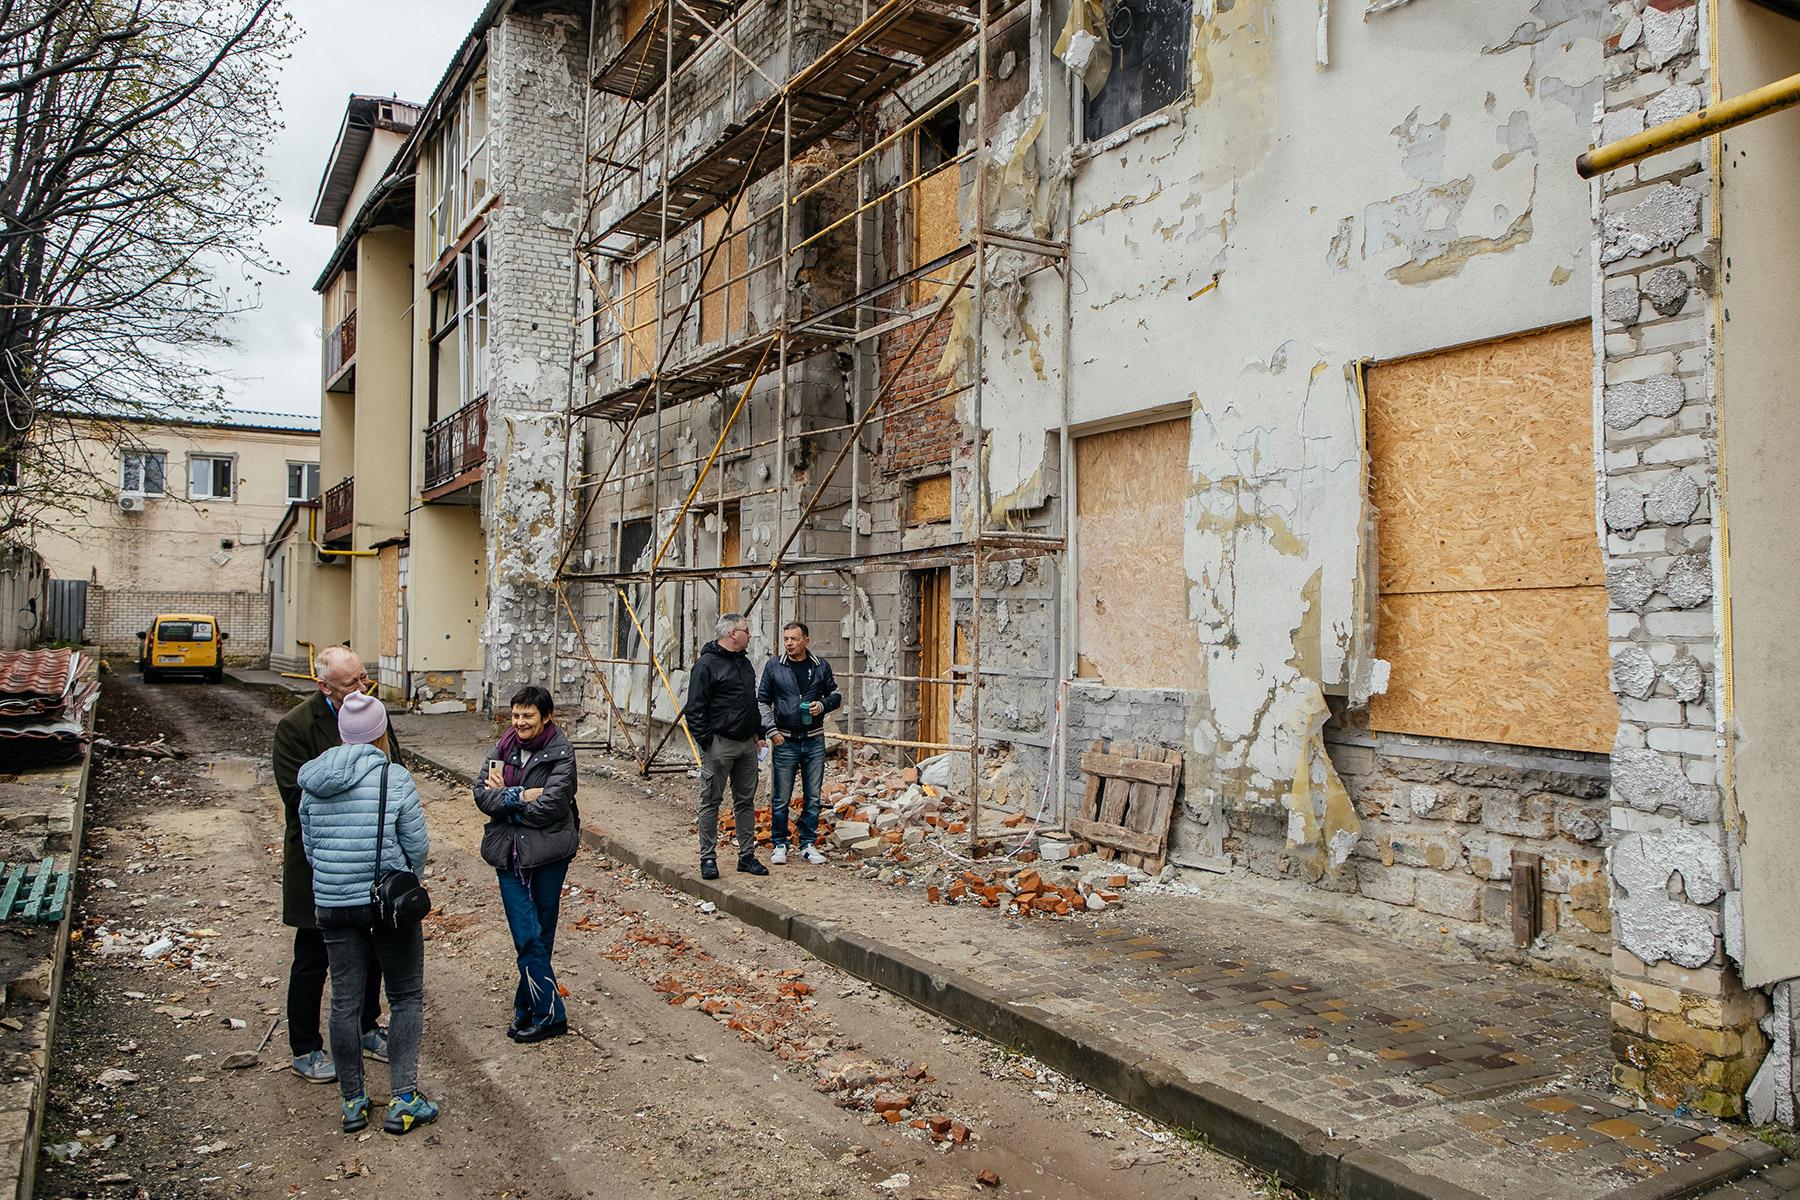 LWF Ukraine team leader Mark Mullan on his first visit to Saltivka, to meet families and inspect apartments destroyed by the war. Photo: LWF/ Anatoliy Nazarenko